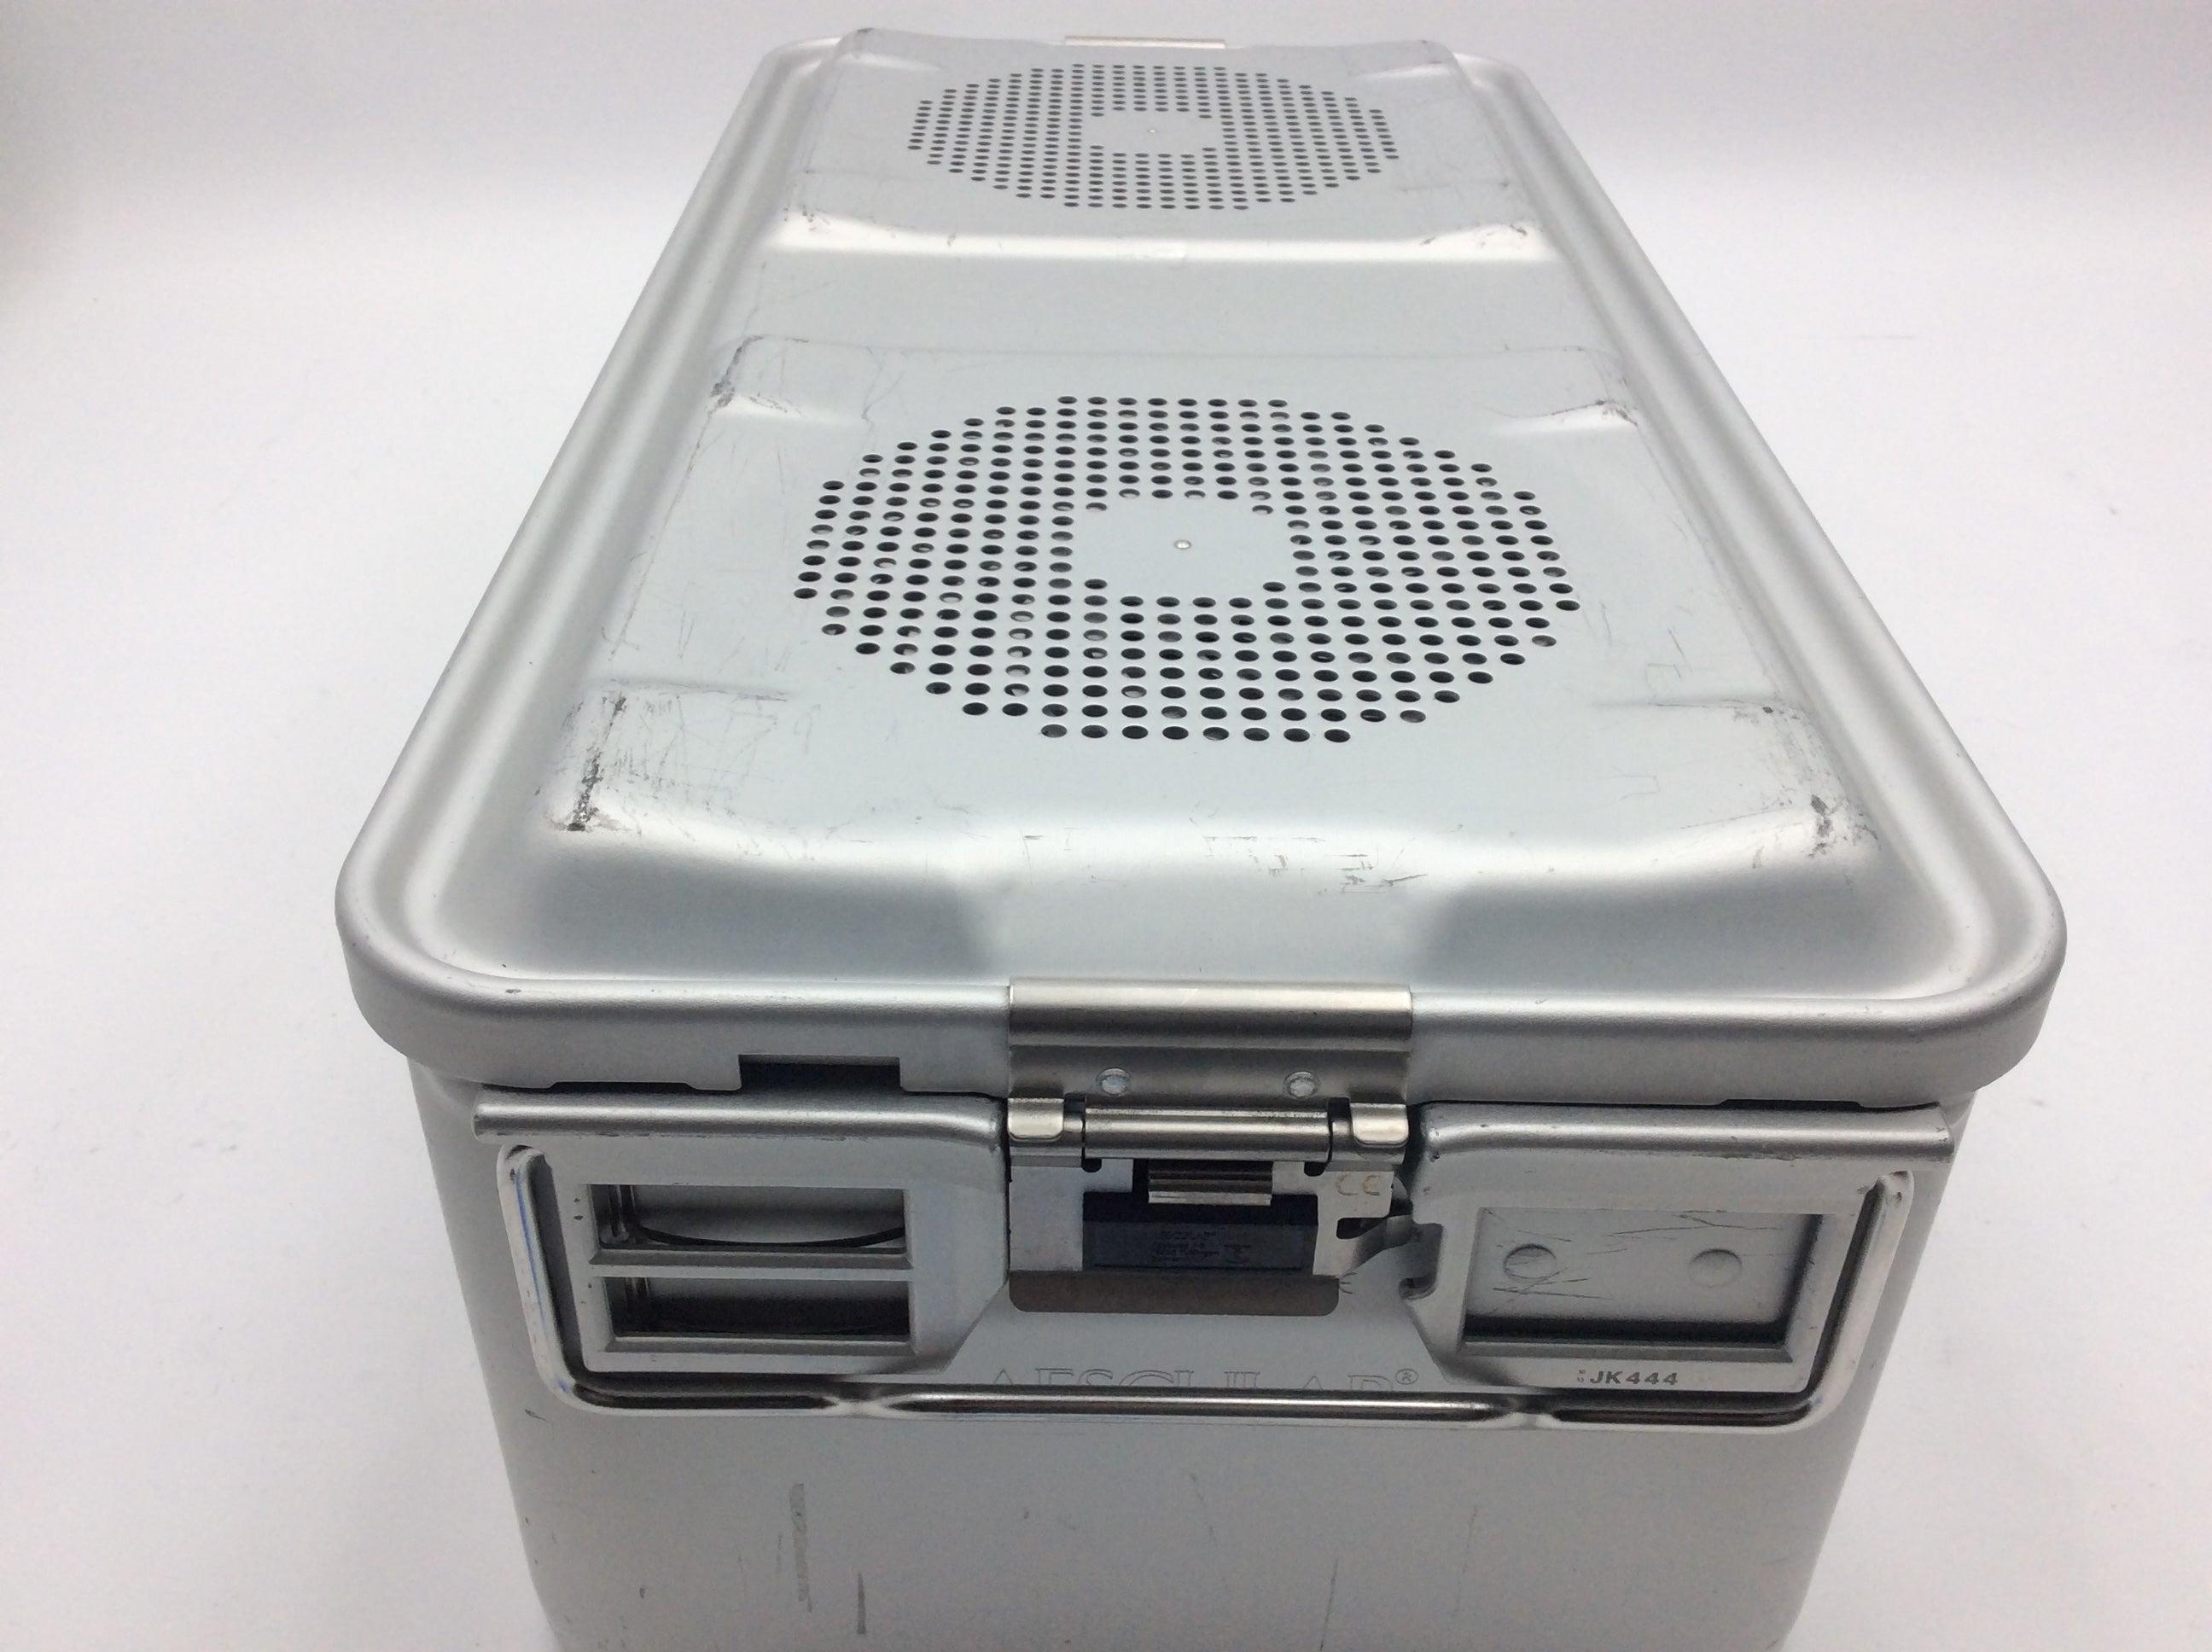 Load image into Gallery viewer, A Biomedical Service Aesculap Sterile Container System JK 444 W/ 2x Plates 165.99